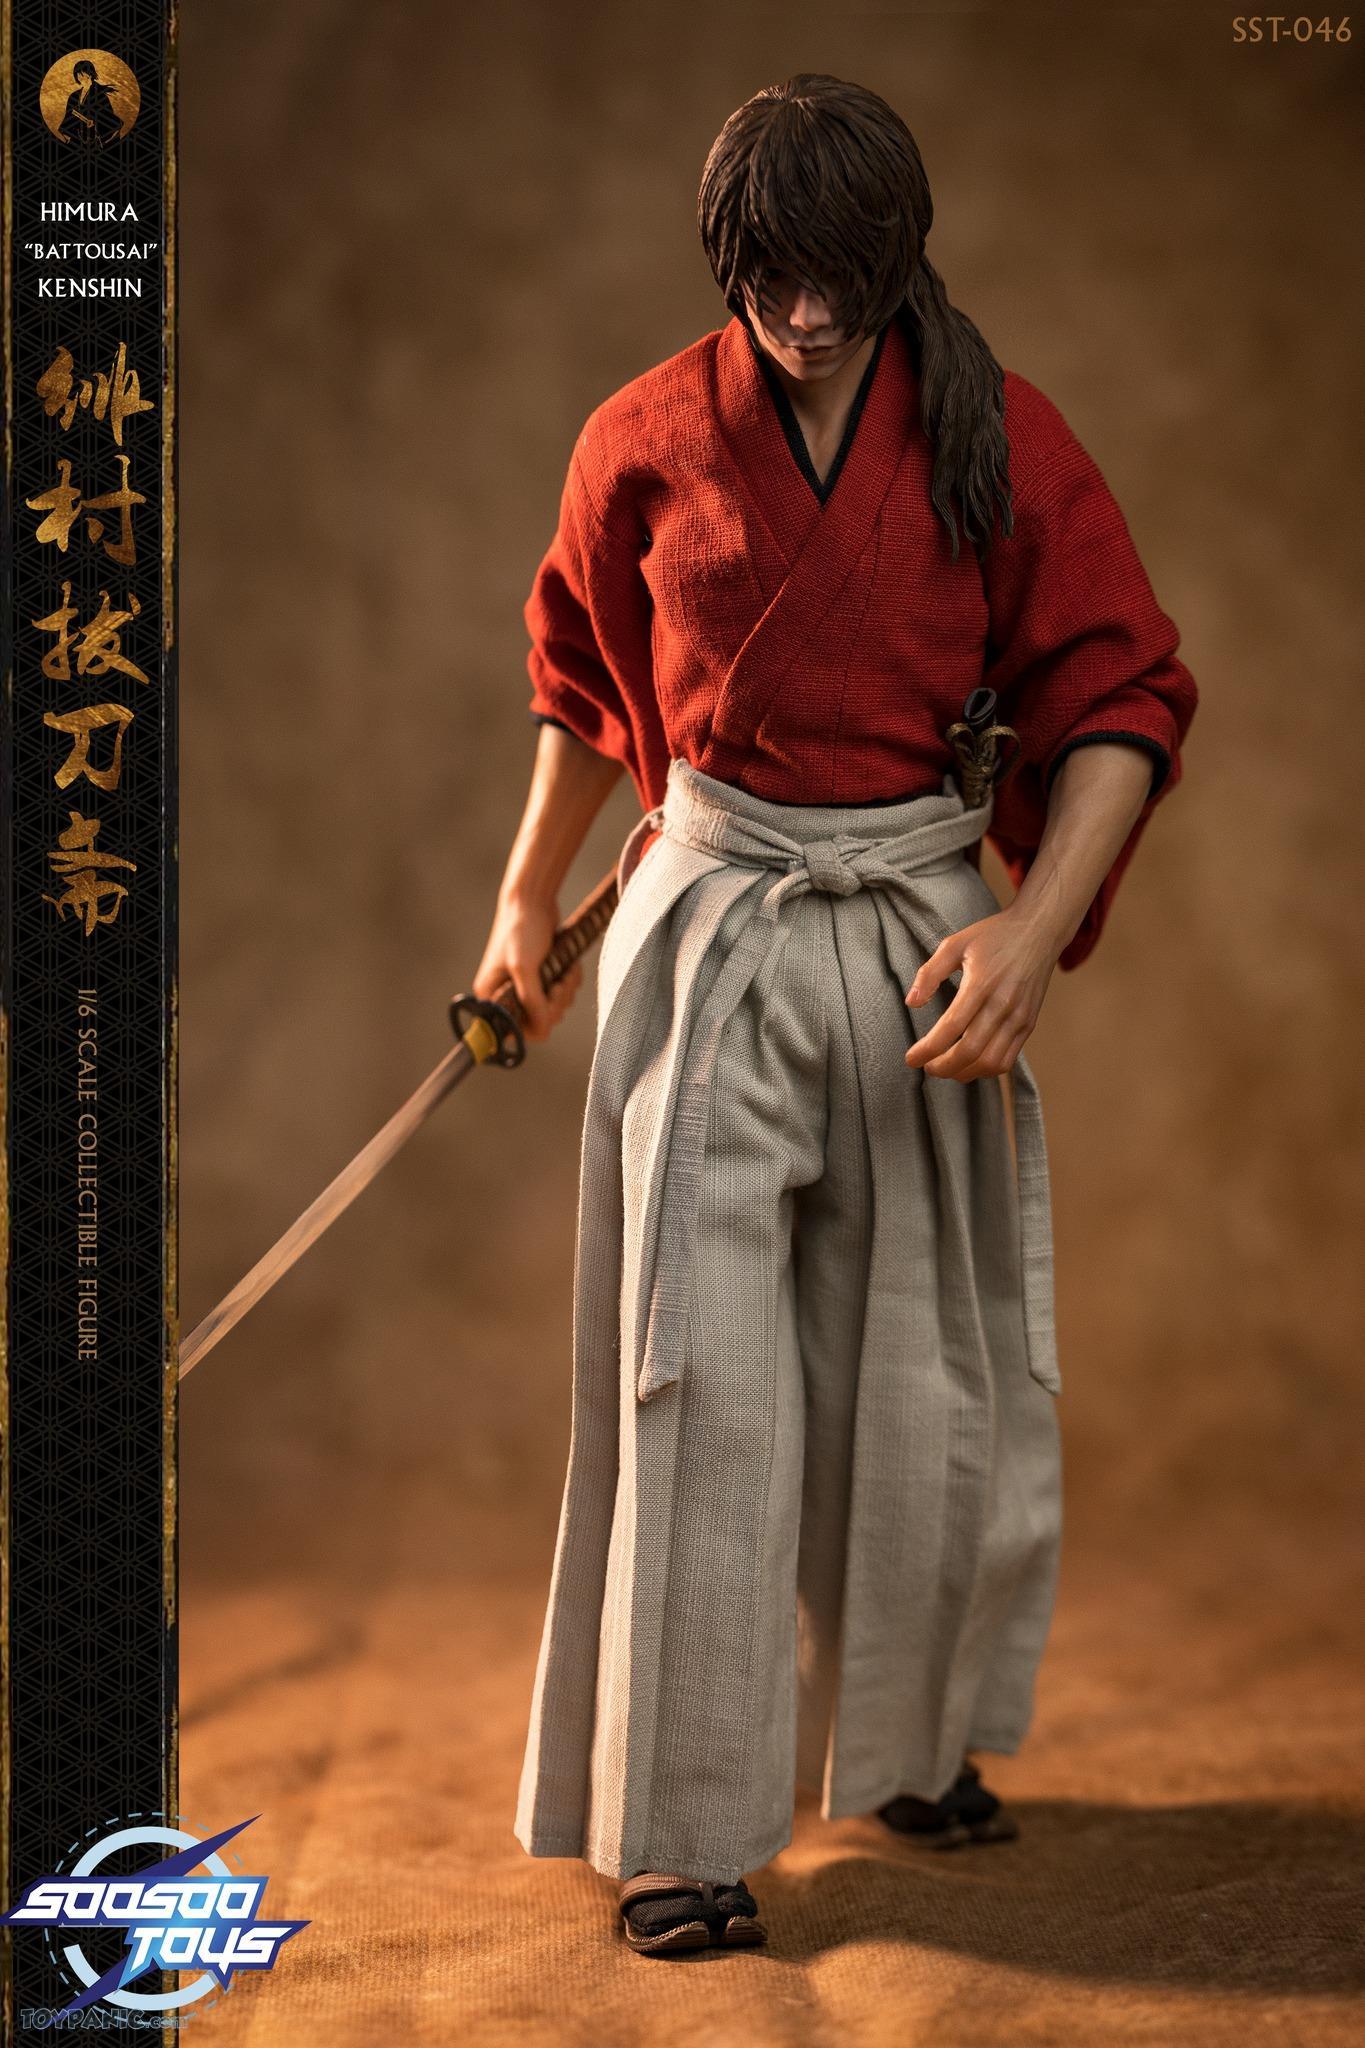 kenshin - NEW PRODUCT: 1/6 scale Rurouni Kenshin Collectible Figure from SooSooToys 712202251232PM_5173529